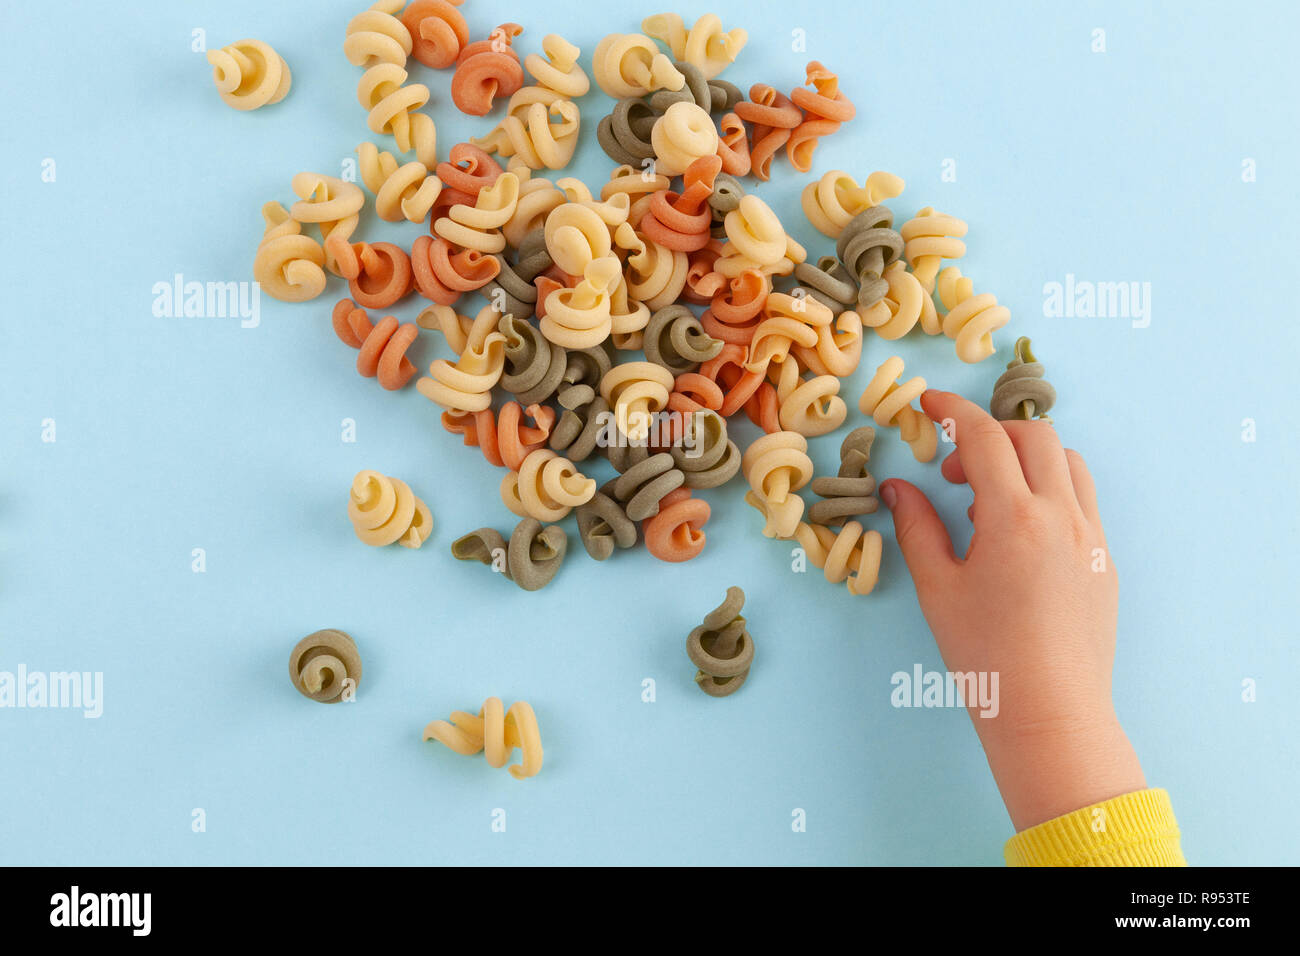 Child playing with Funghetto veggie pasta on light blue background Stock Photo